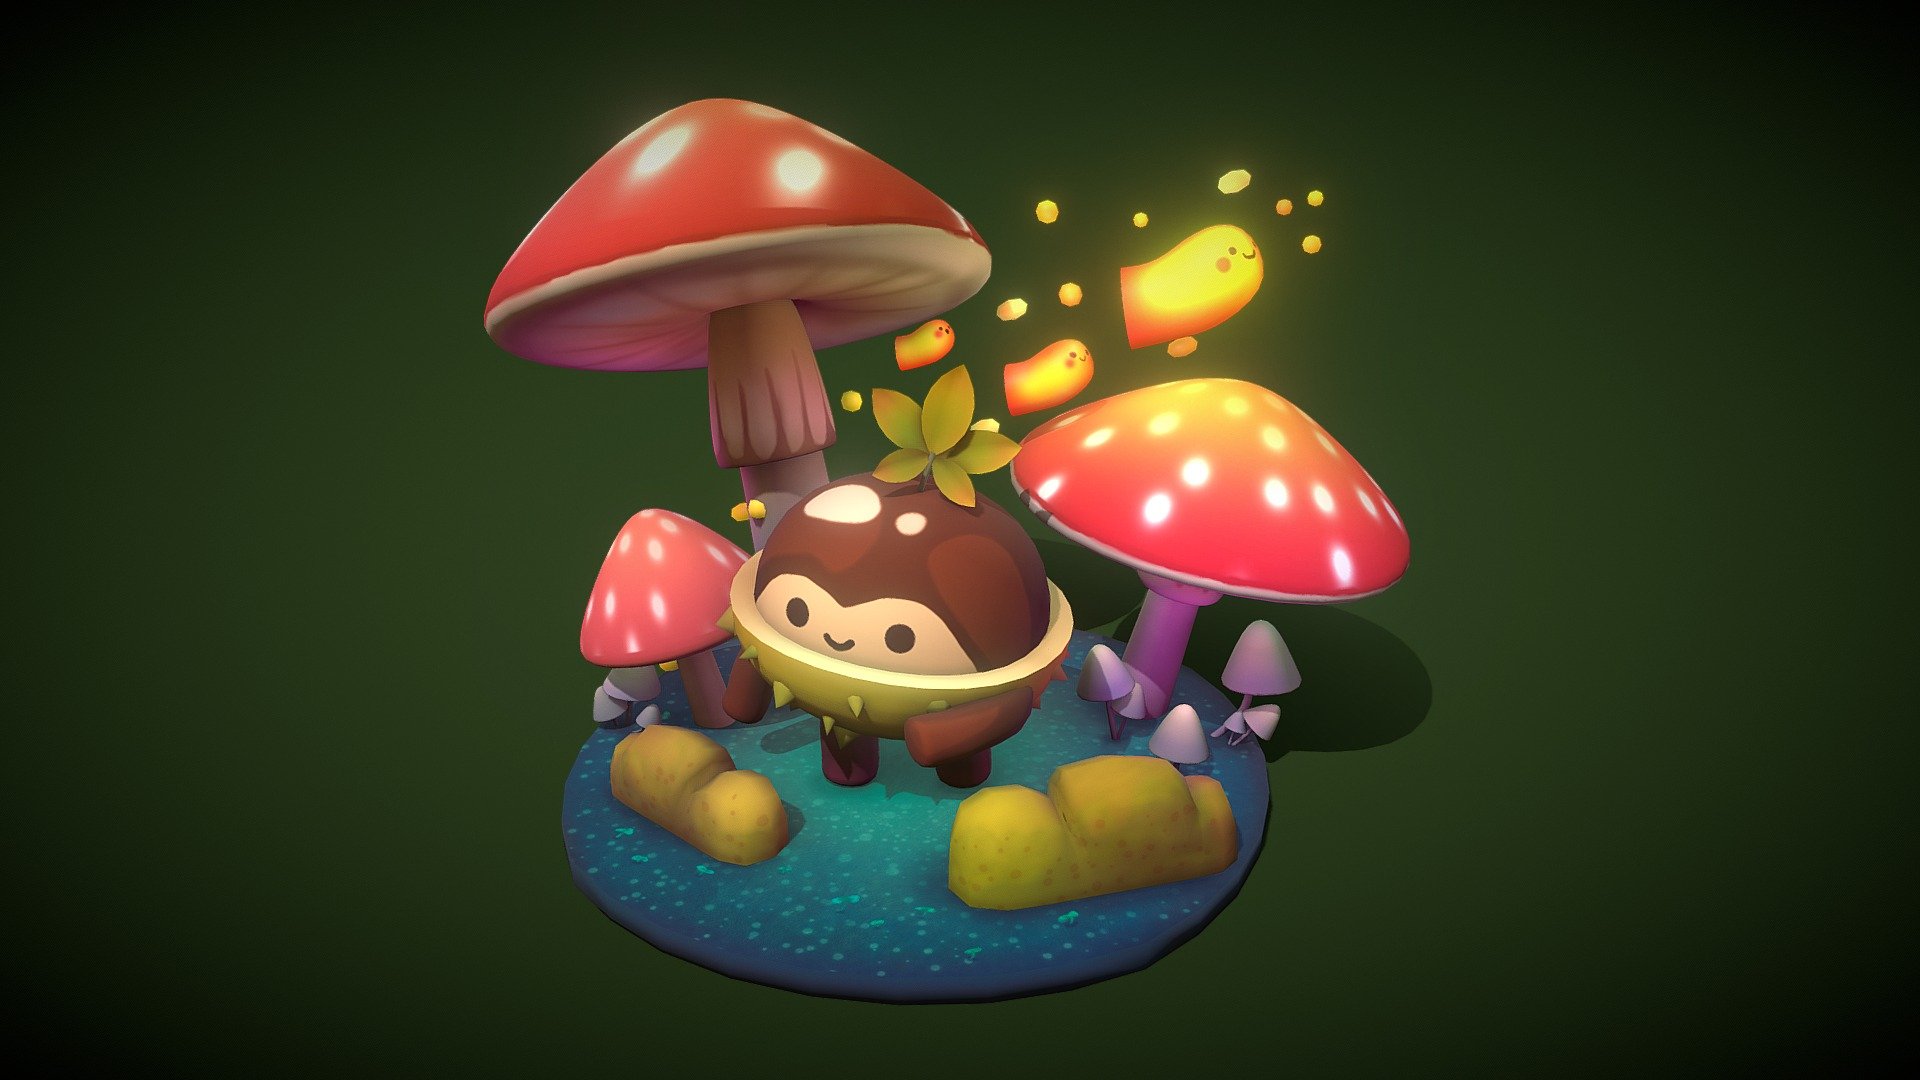 It was a great plesure to work on this cute atumn scene after a long break
 Inspired by the EllieVSBear's work - Little Chestnut - Download Free 3D model by Dasha Klyusova (@AnoFail) 3d model